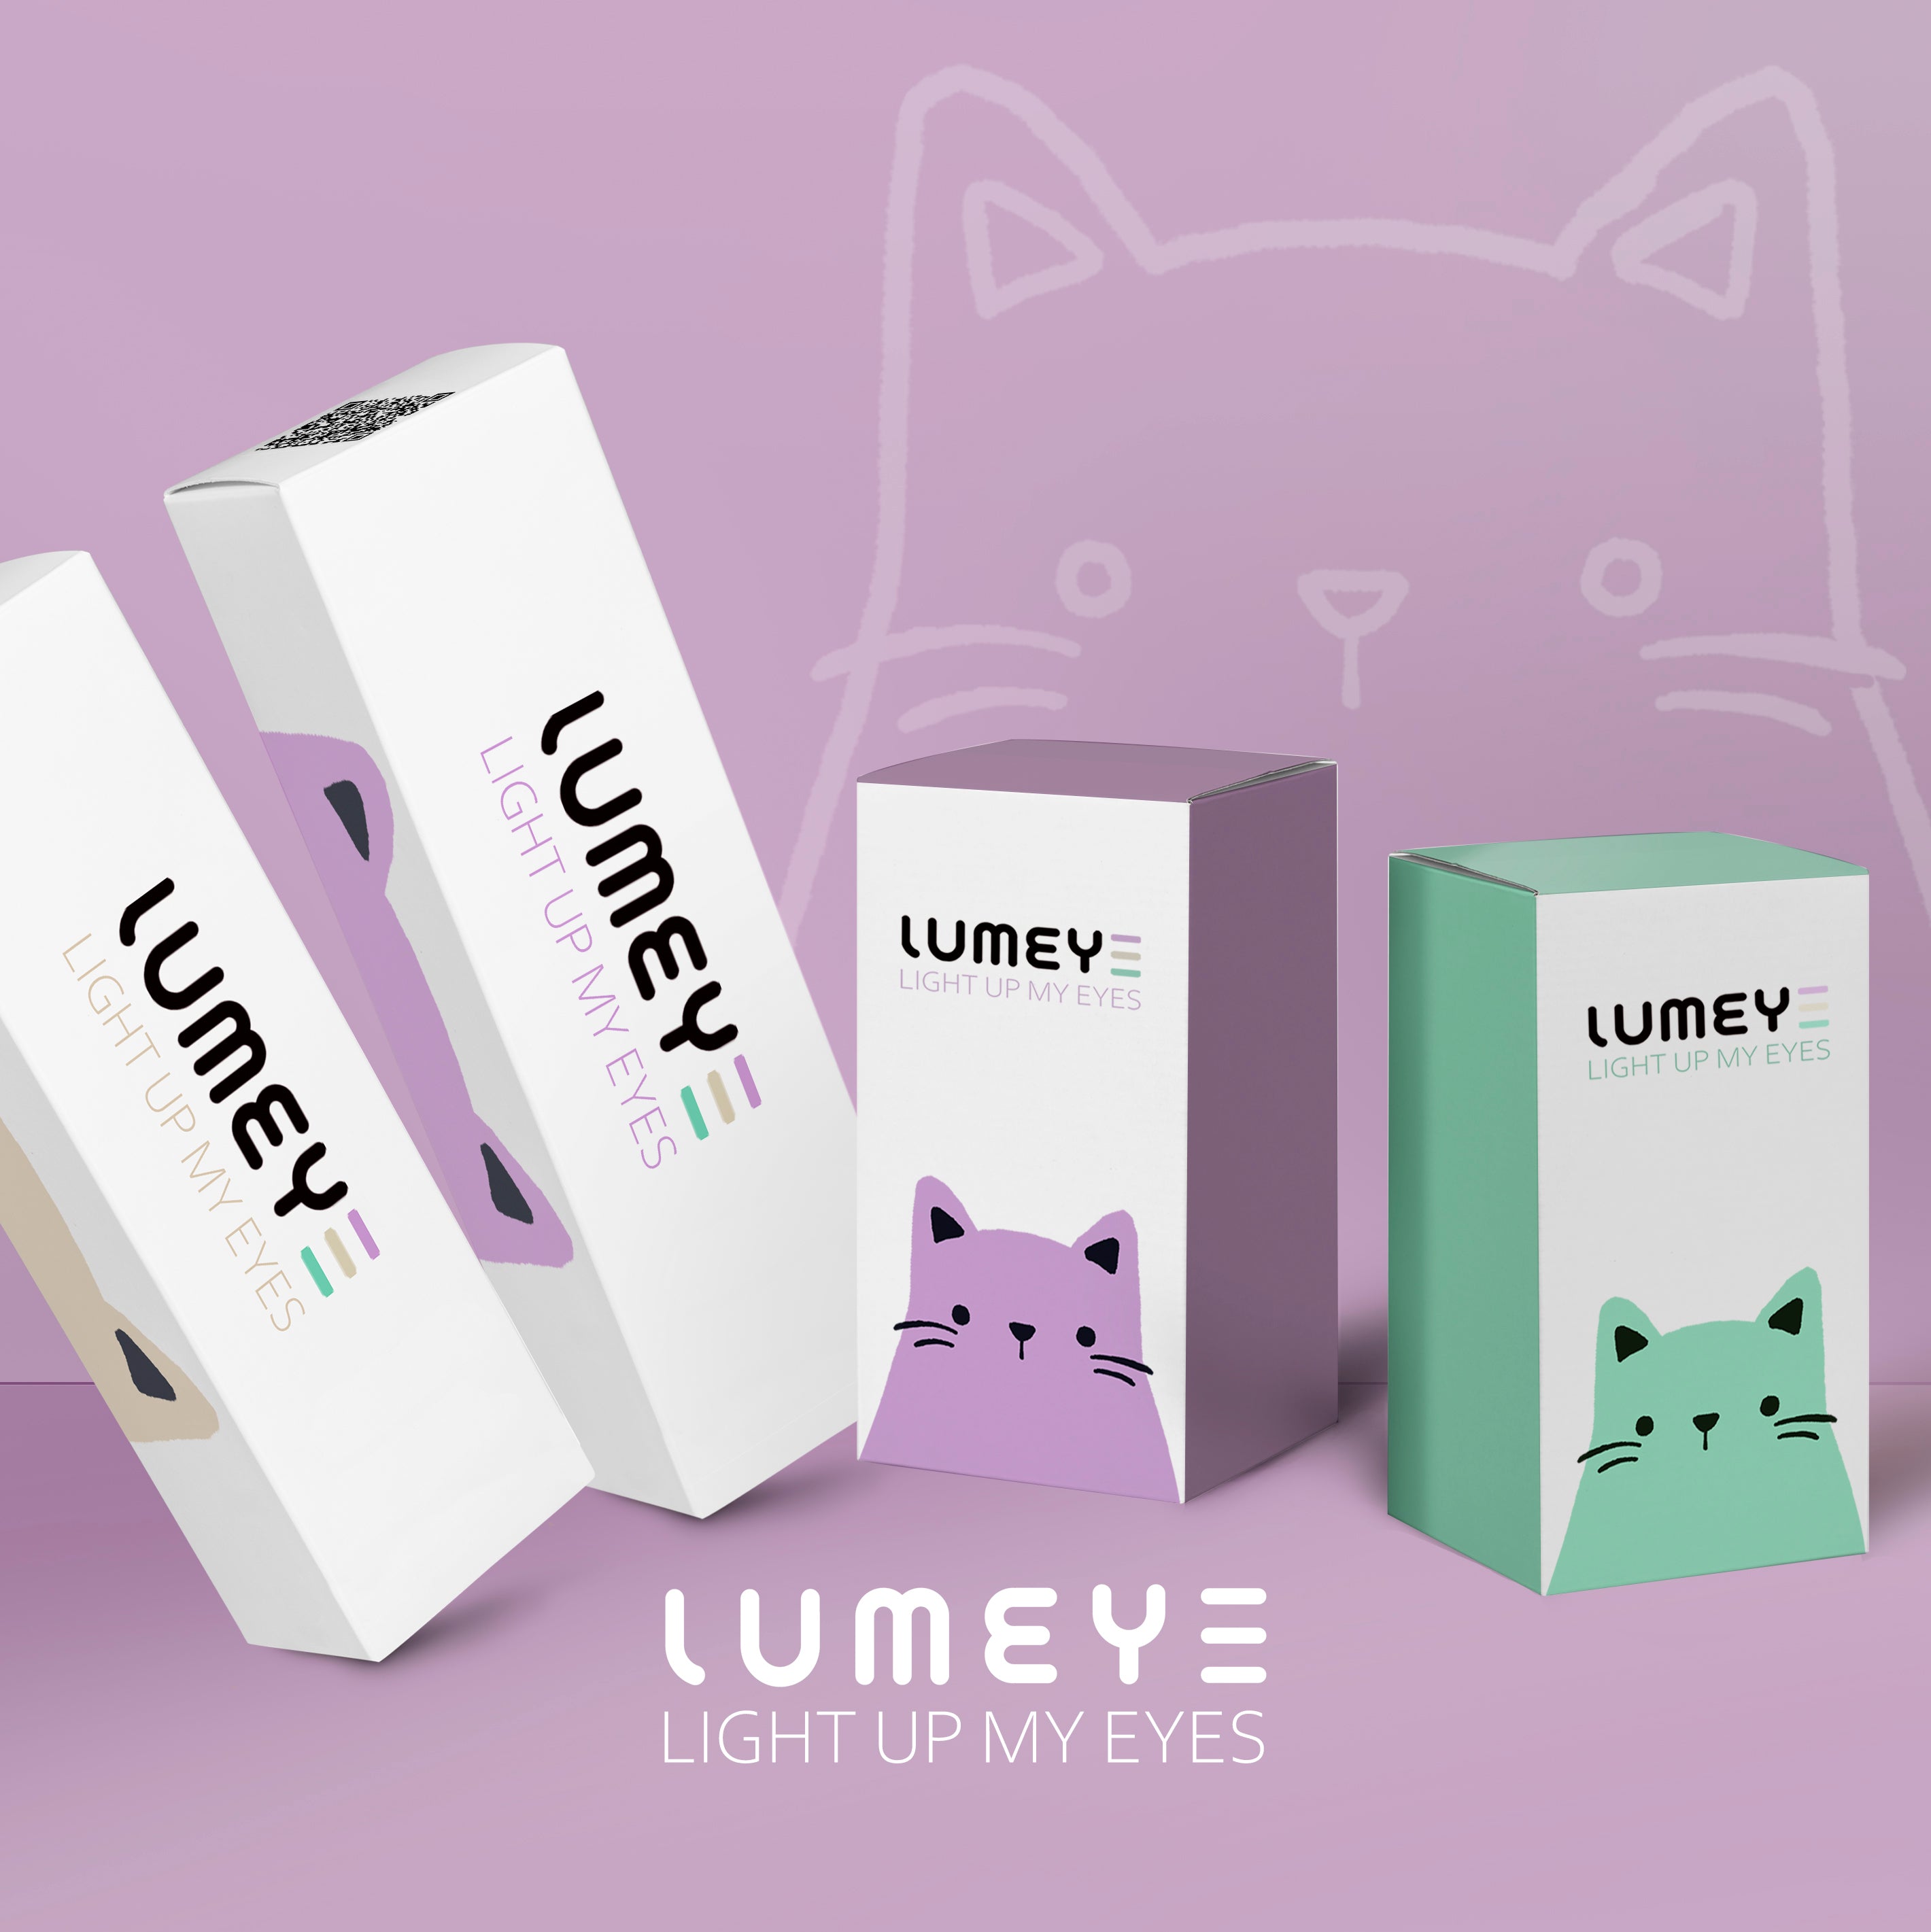 Best COLORED CONTACTS - LUMEYE Soul Reaping Yellow Colored Contact Lenses - LUMEYE